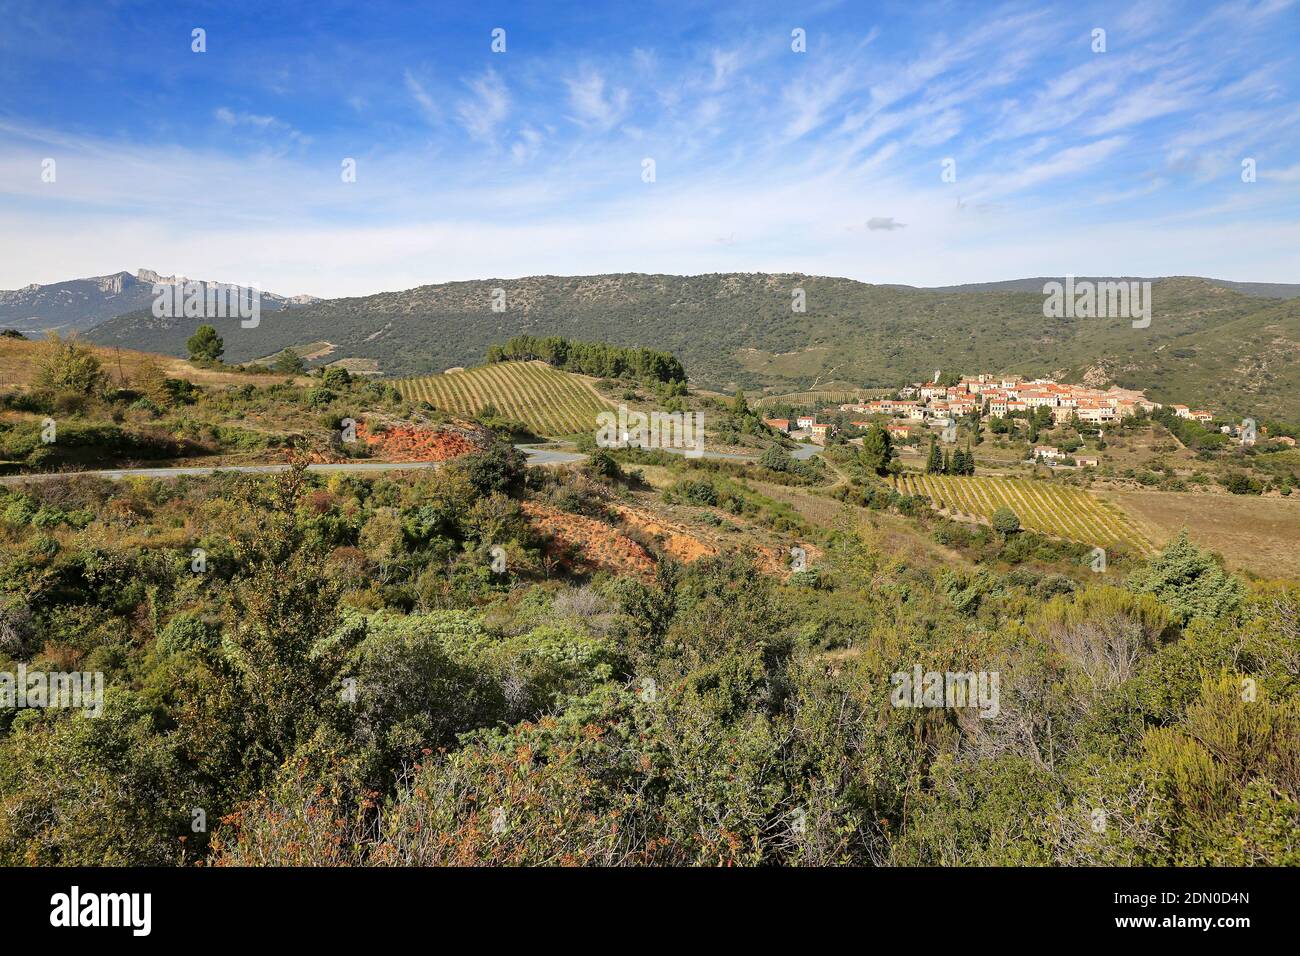 Cucugnan (south of France): overview of the village surrounded by vineyards in the Hautes-Corbieres area. Stock Photo